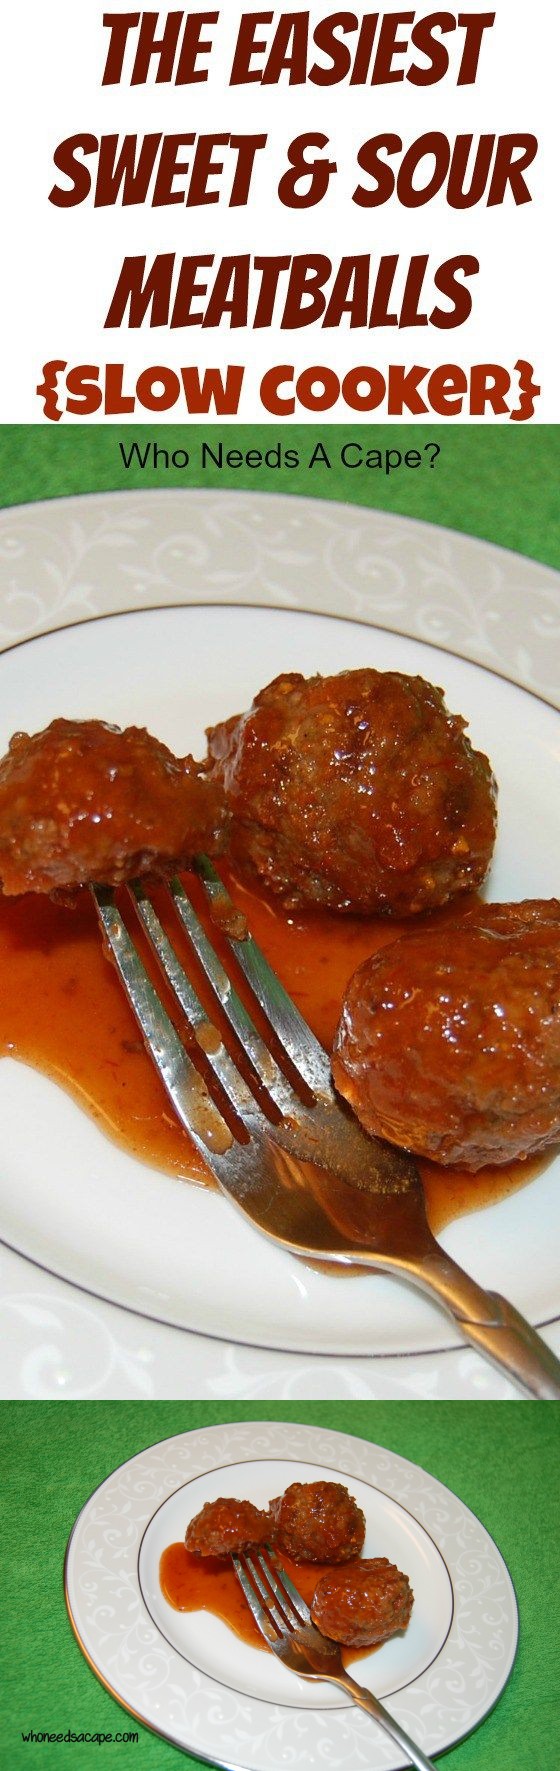 The Easiest Sweet and Sour Meatballs Ever